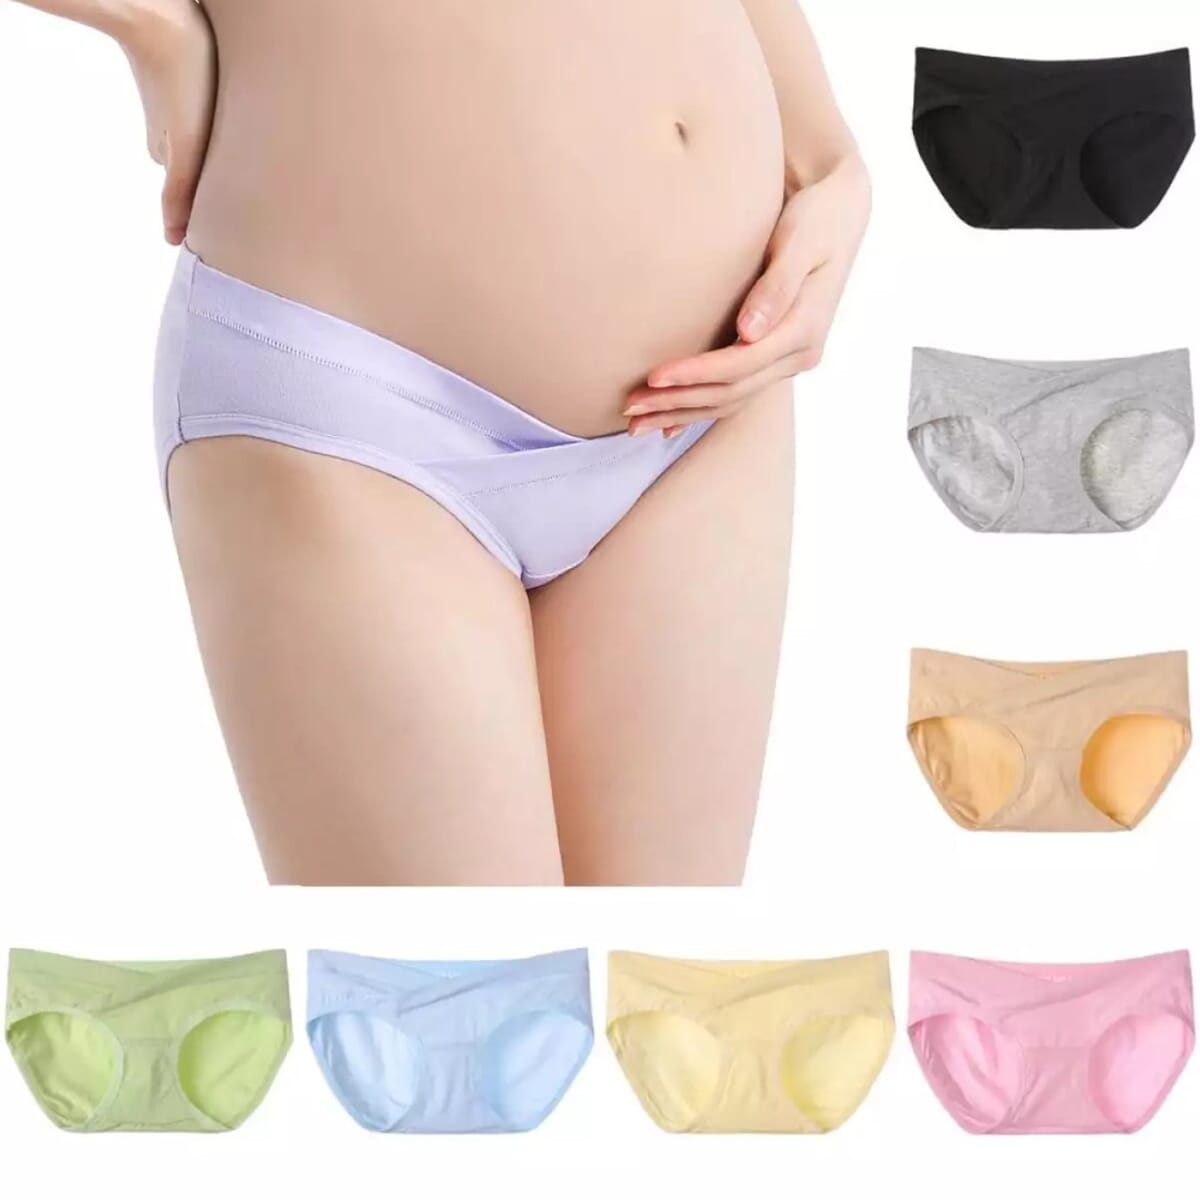 Maternity Intimates - Buy Maternity Intimates at Best Price in Nepal